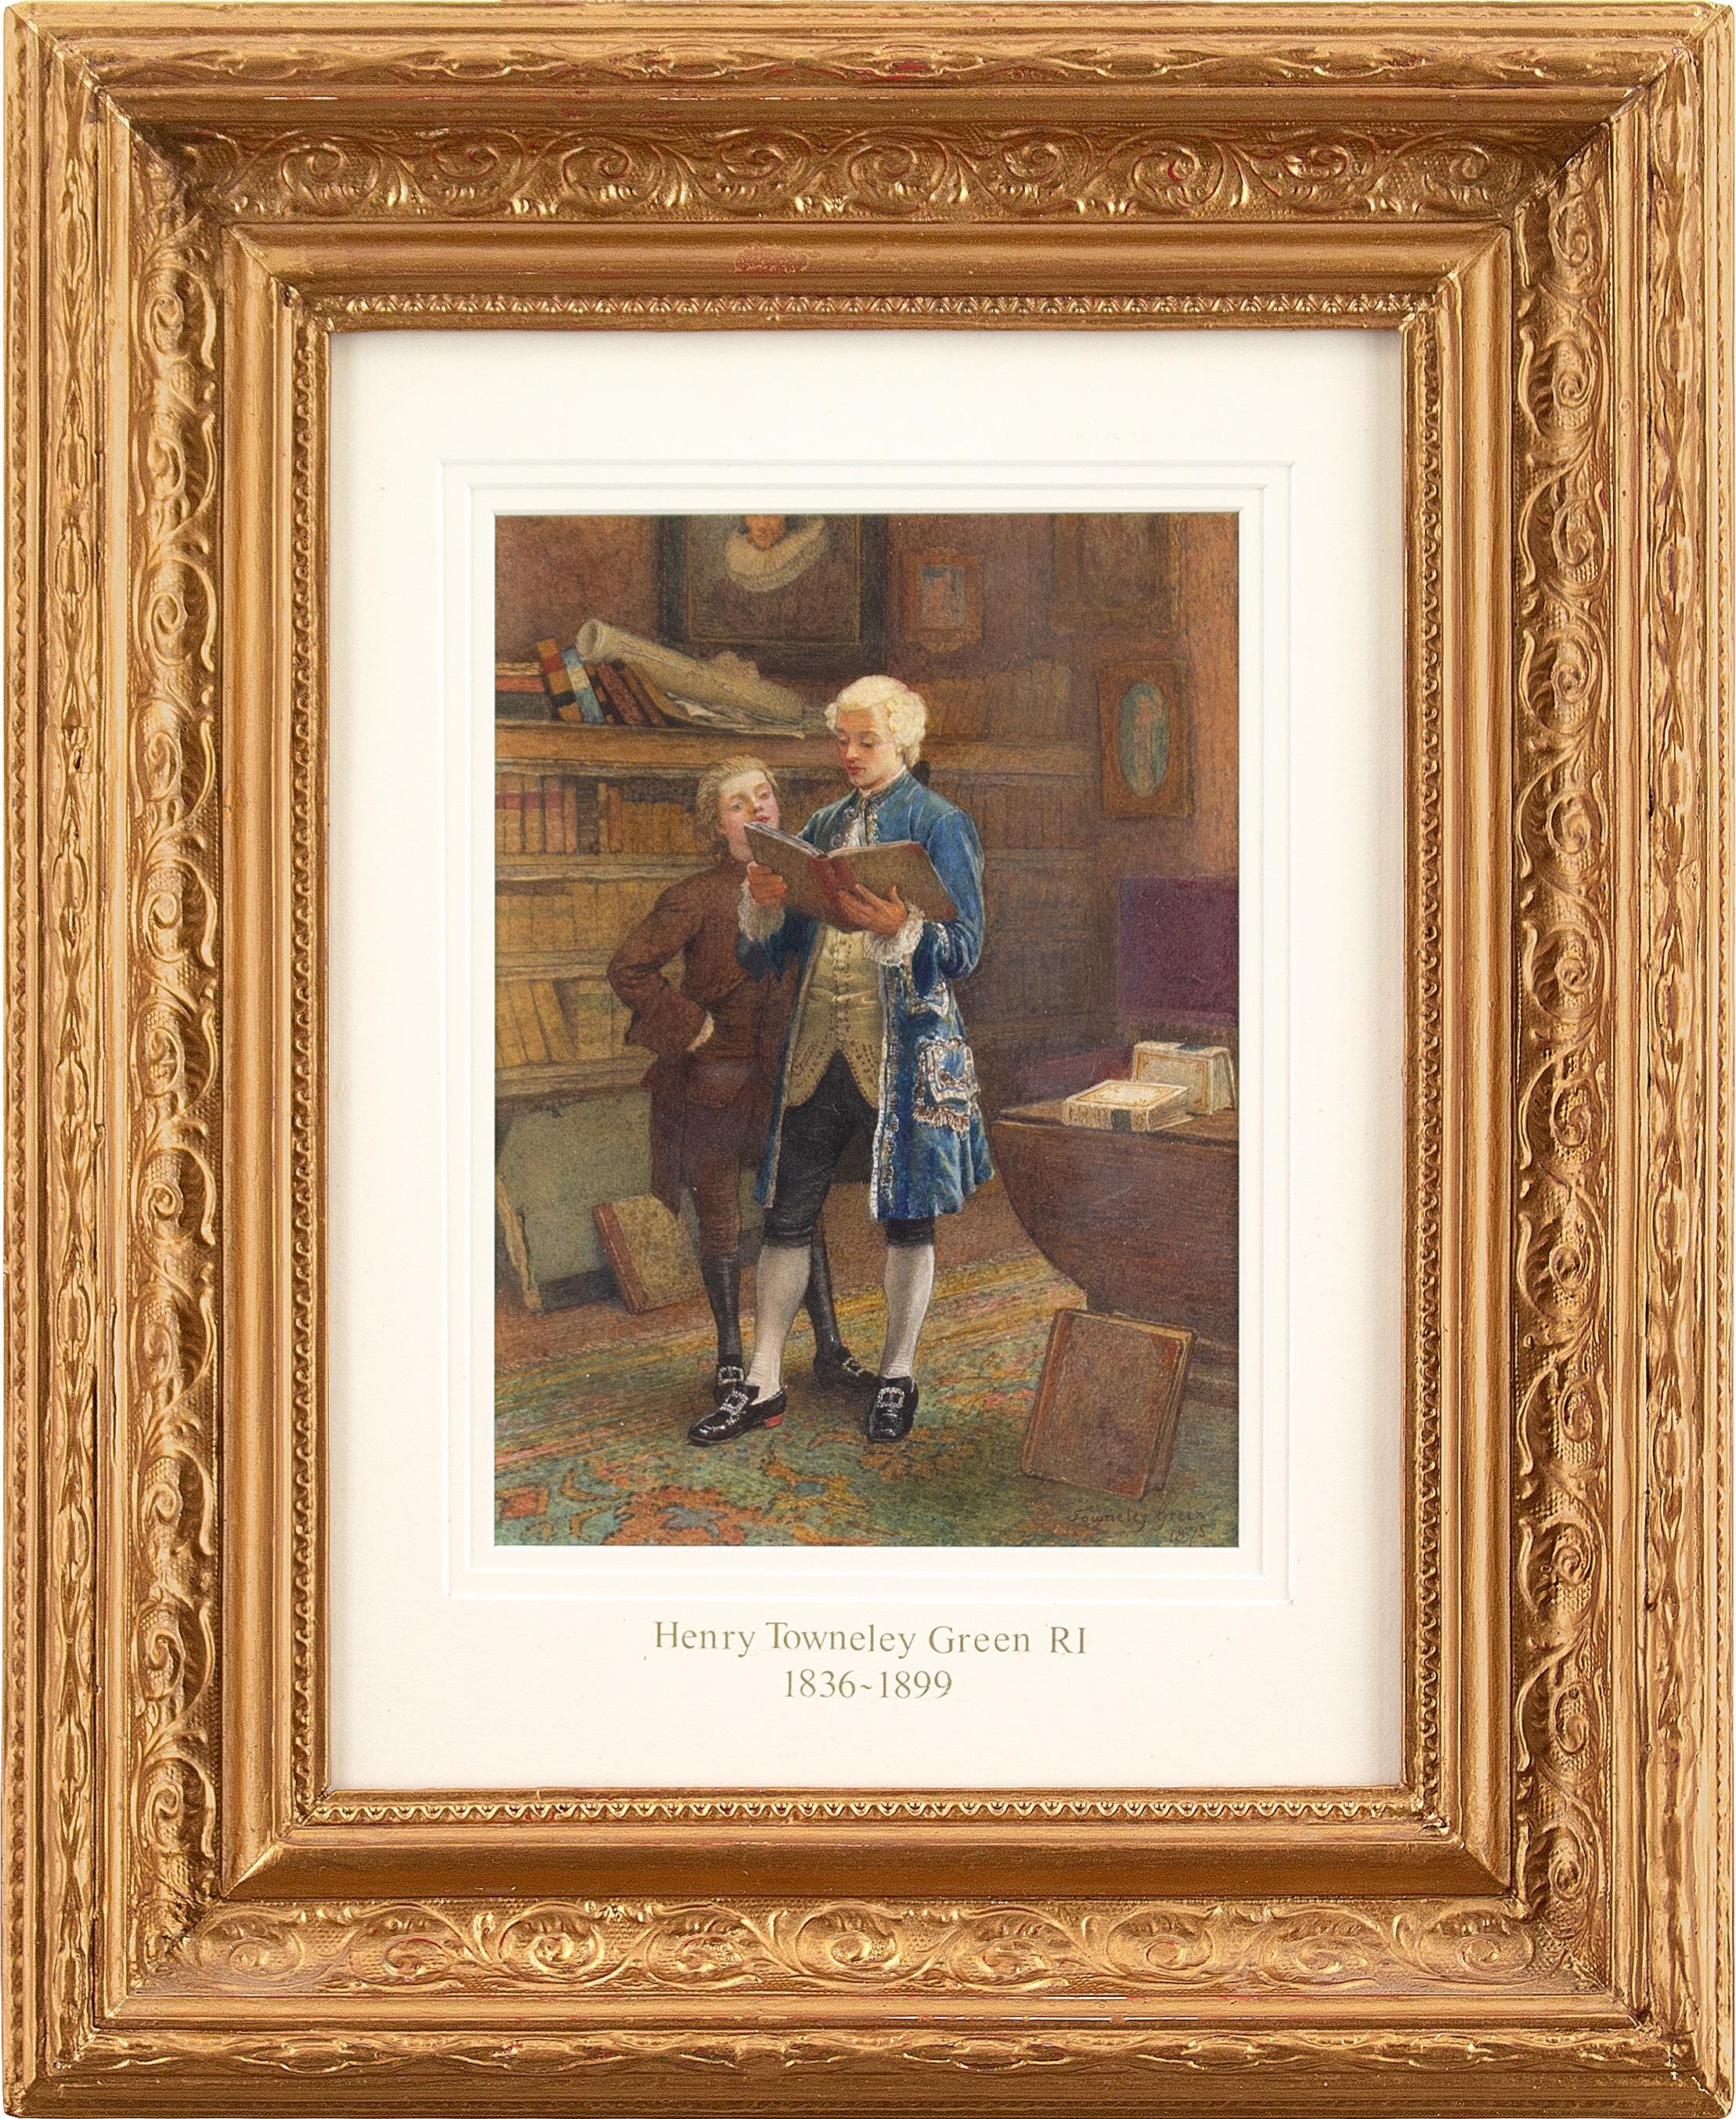 Henry Towneley Green - Henry Towneley Green, An Interesting Read,  Watercolour For Sale at 1stDibs